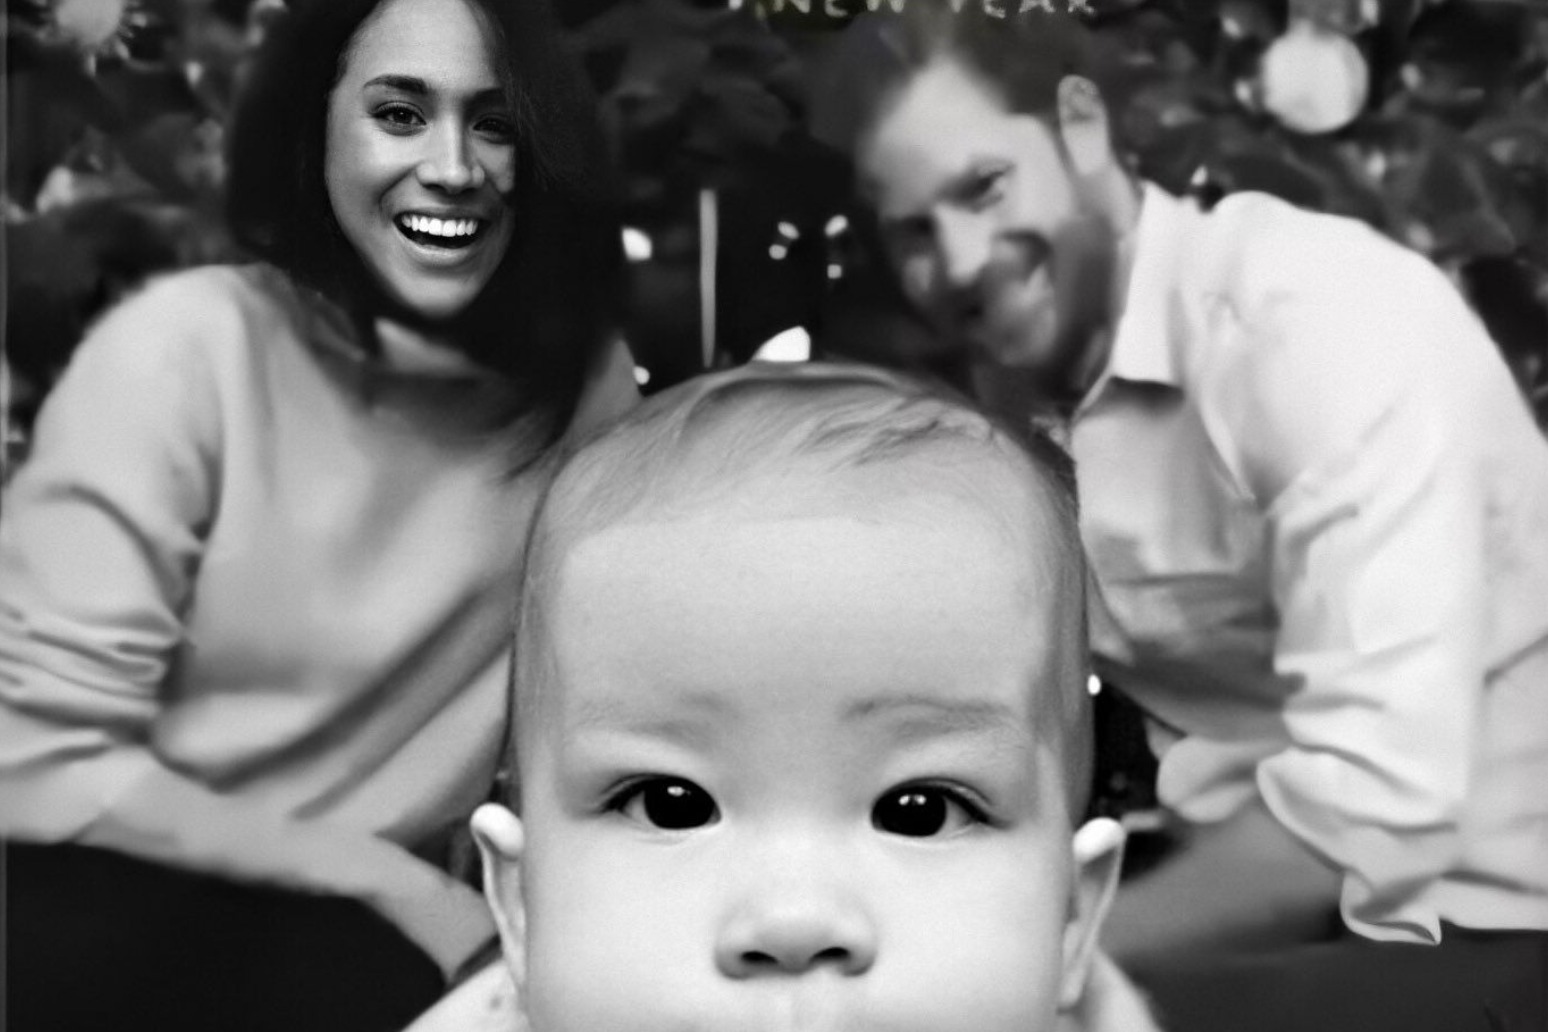 HARRY, MEGHAN AND ARCHIE PICTURED ON CHRISTMAS CARD 